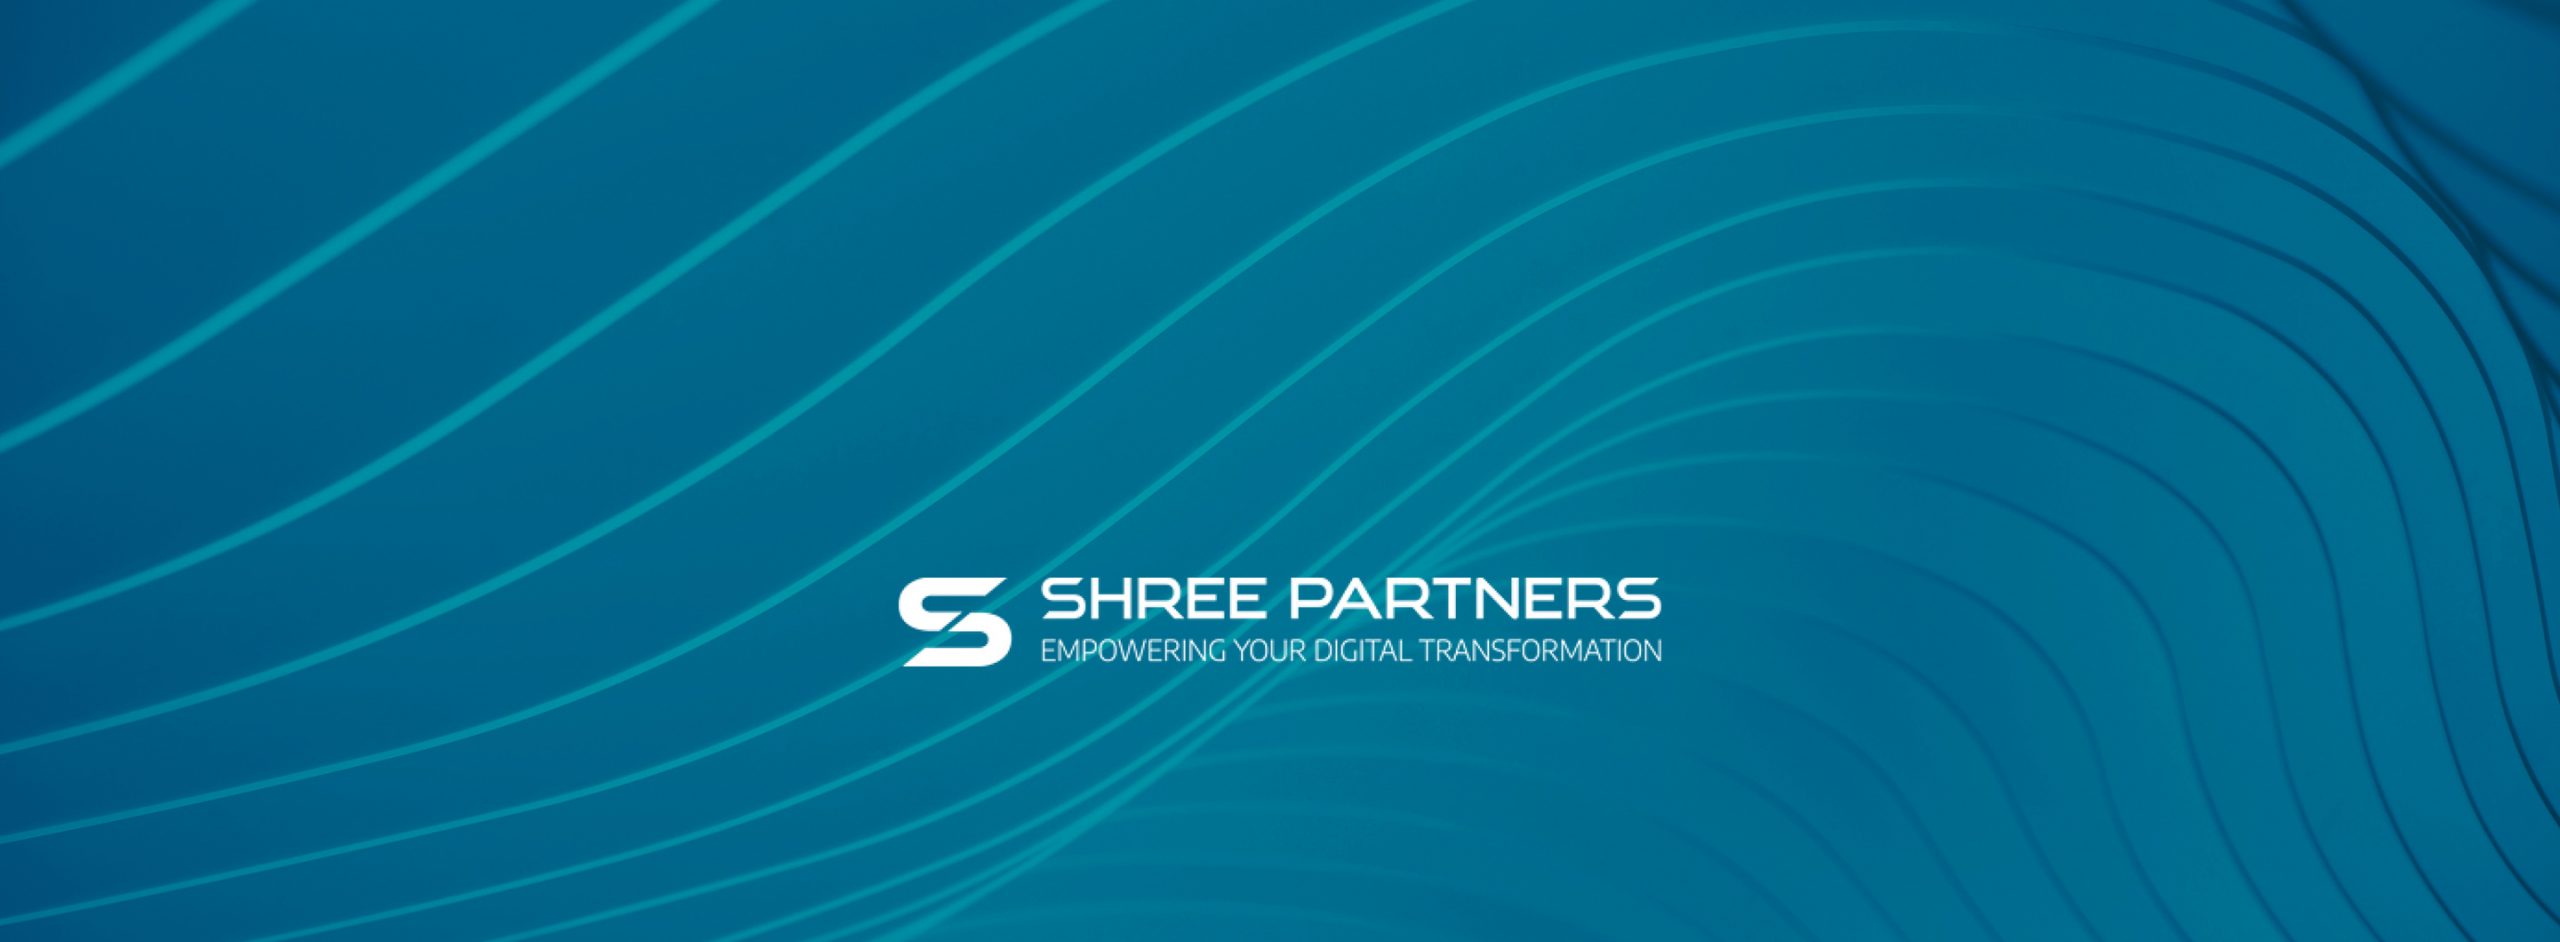 Welcoming Shree Partners to the Persistent